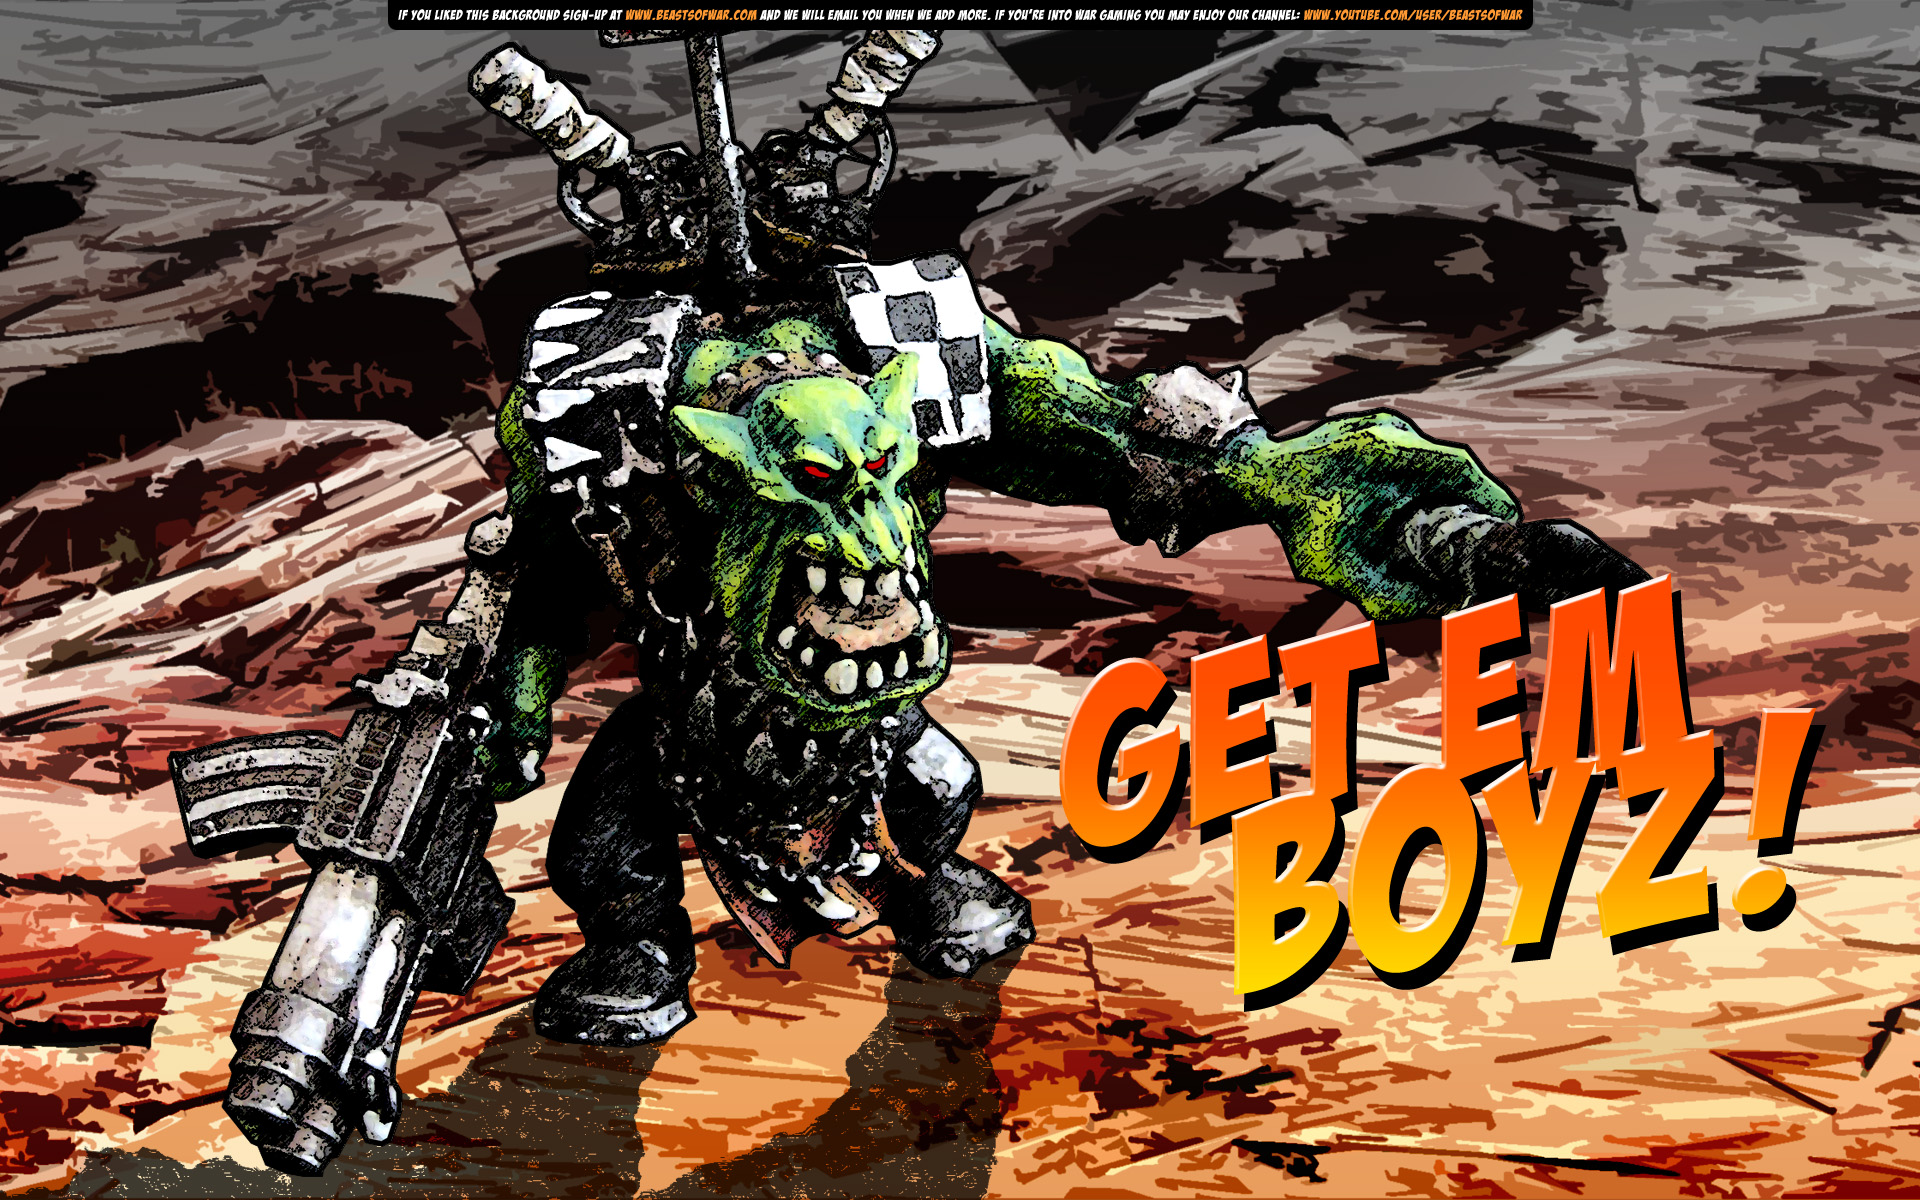 Ork Boss Wallpaper Image Orc And Orks Fantasy Monsters Fan